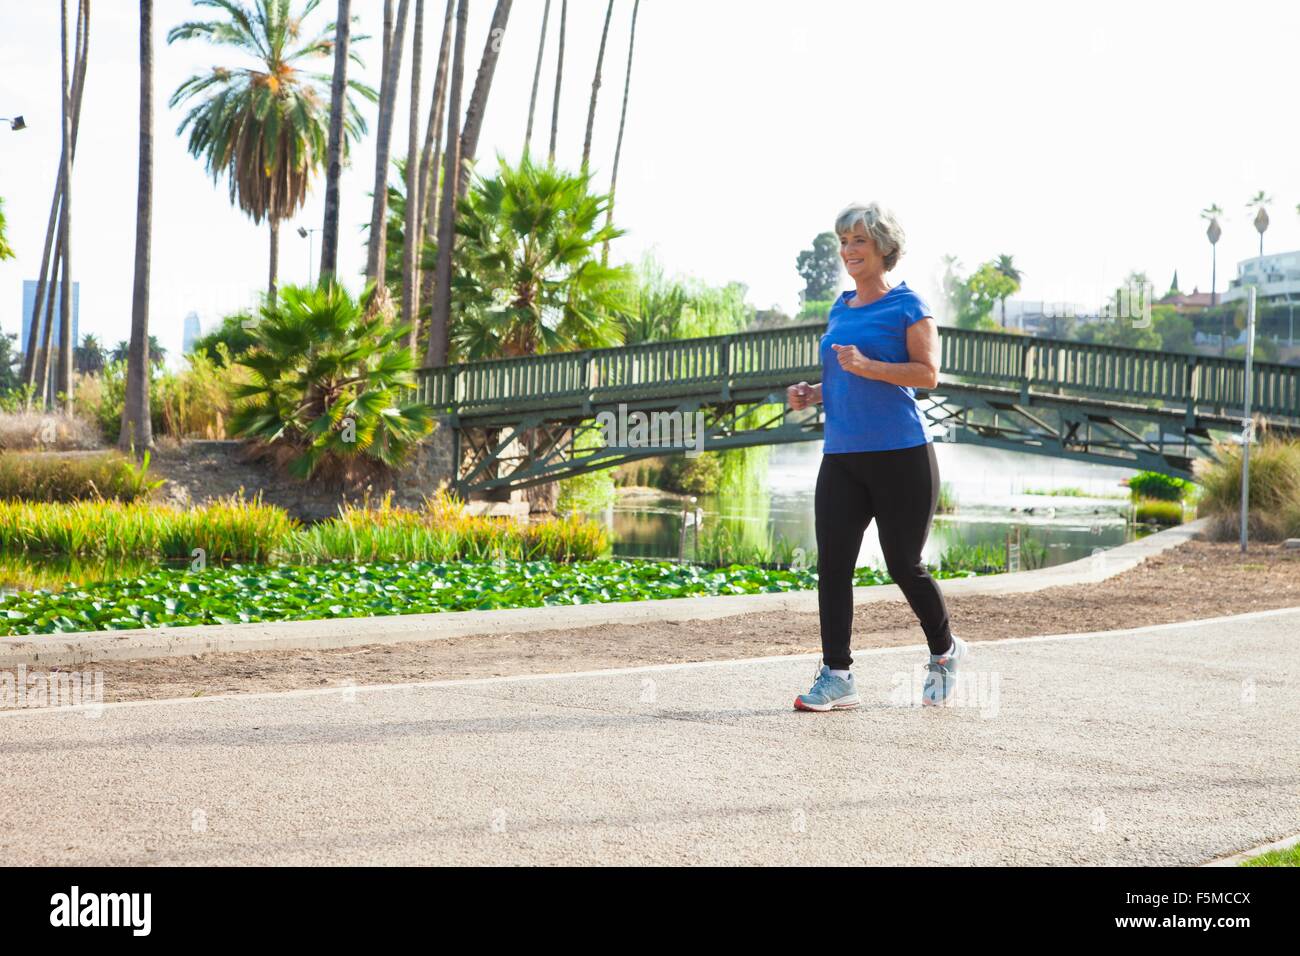 Mature woman jogging in park Stock Photo